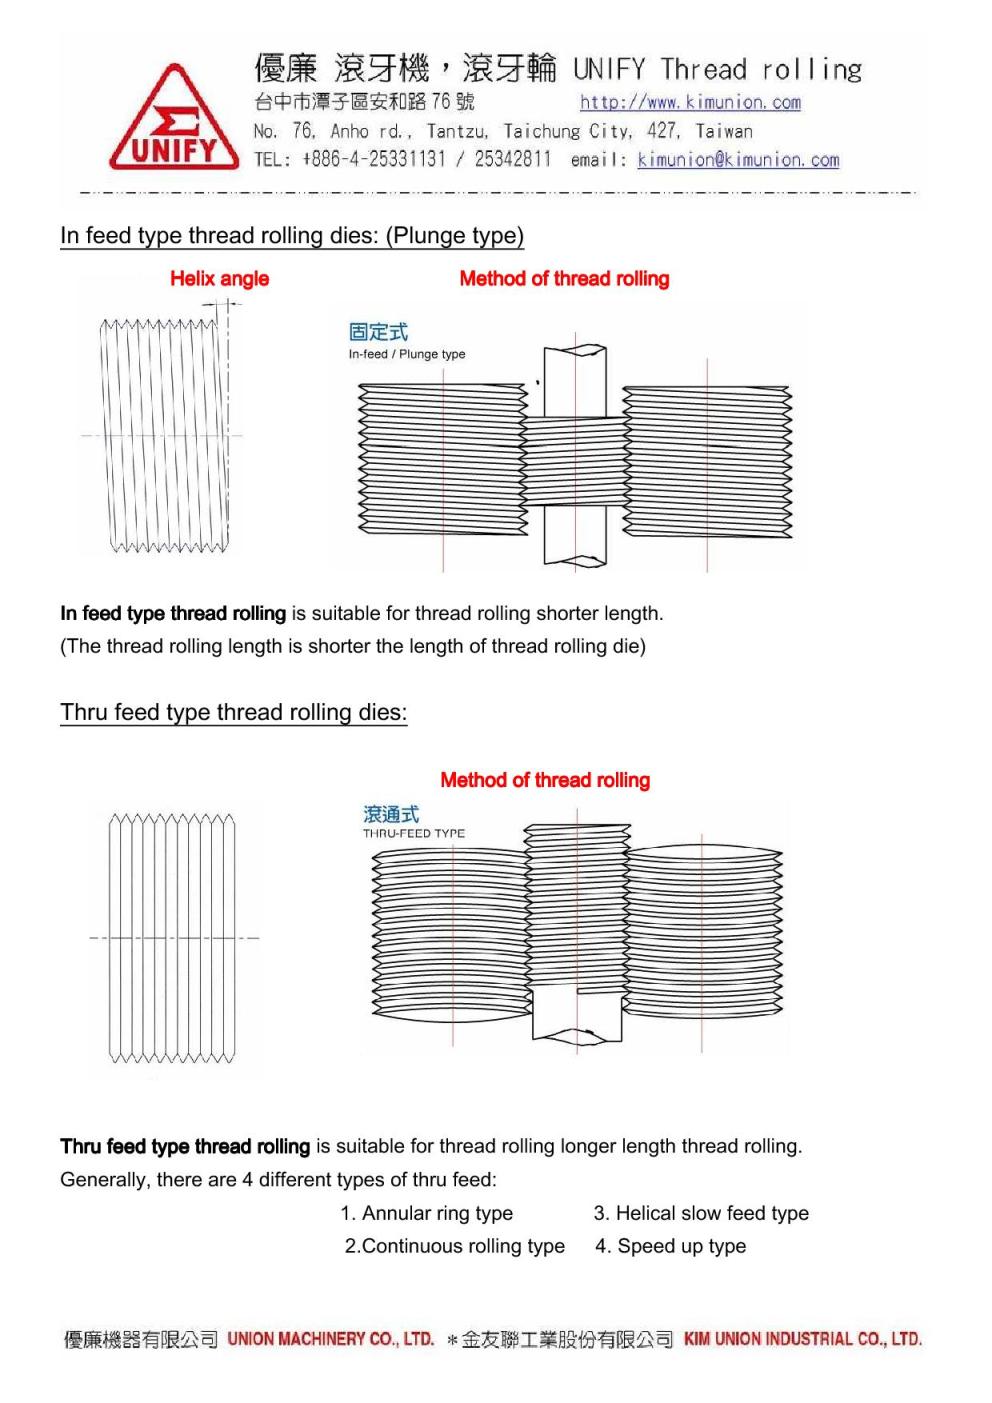 The difference of In feed type (Plunge) & Thru feed type thread rolling dies